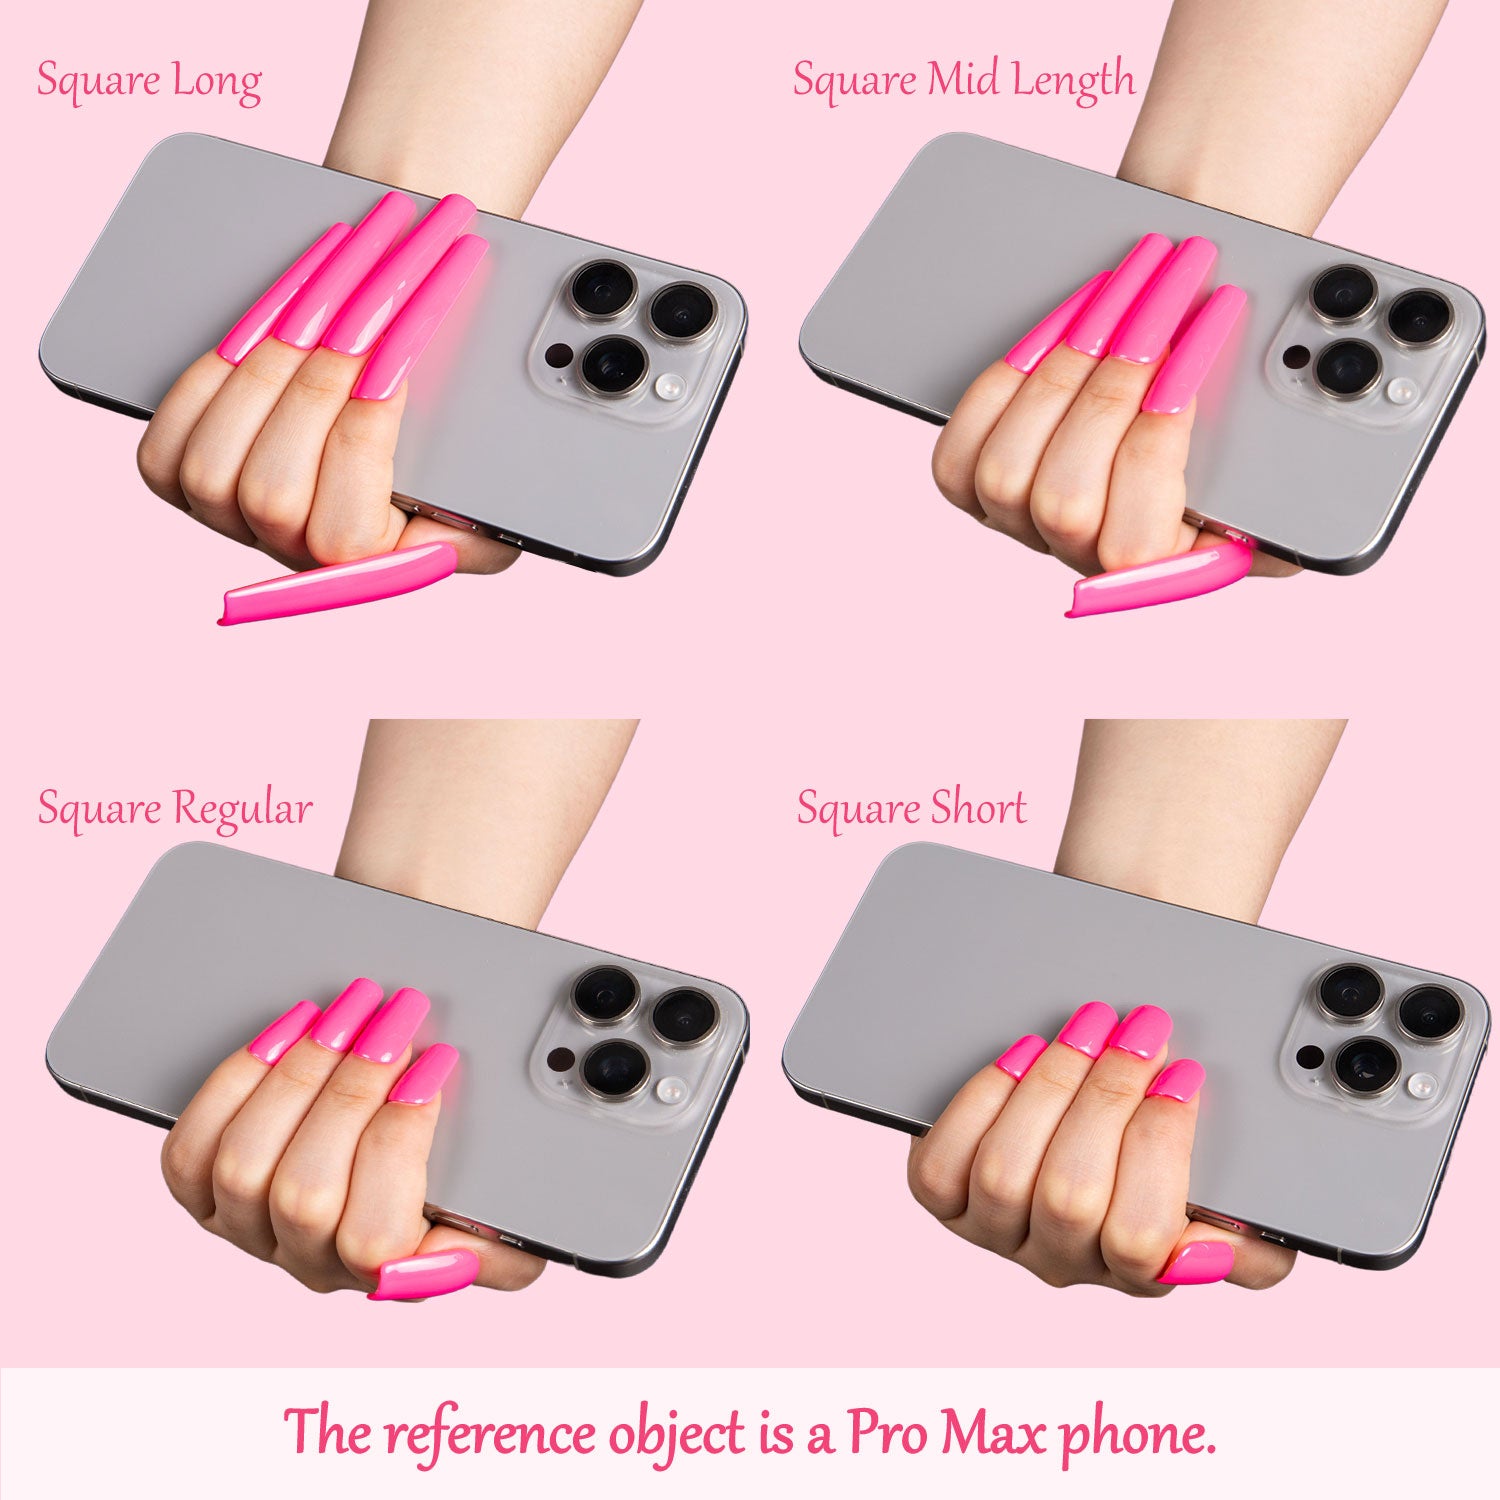 Four lengths of bright pink square-shaped press-on acrylic nails shown on hands holding a Pro Max phone, labeled as Square Long, Square Mid Length, Square Regular, and Square Short.